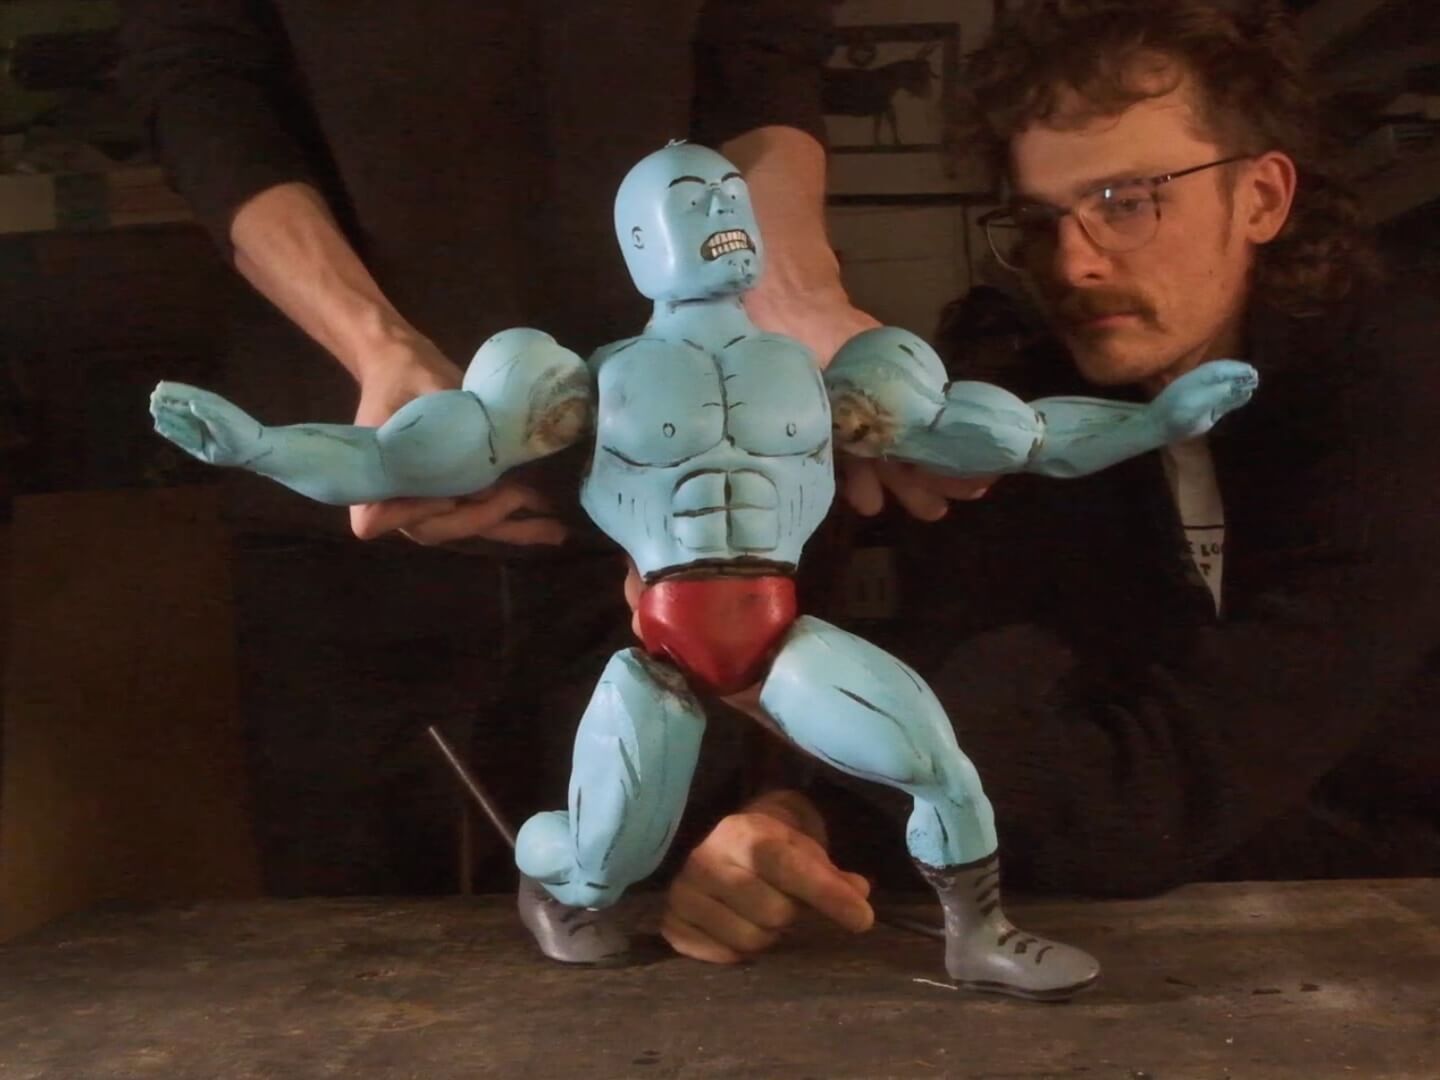 Two young men dressed in black use metal rods and work together to pose a 15-inch-tall foam puppet that looks like a bald, muscular, blue-skinned bodybuilder or professional wrestler, wearing red briefs and black boots. The puppet is scowling and has one leg extended behind him, as if he's lunging forward, with his arms outstretched.